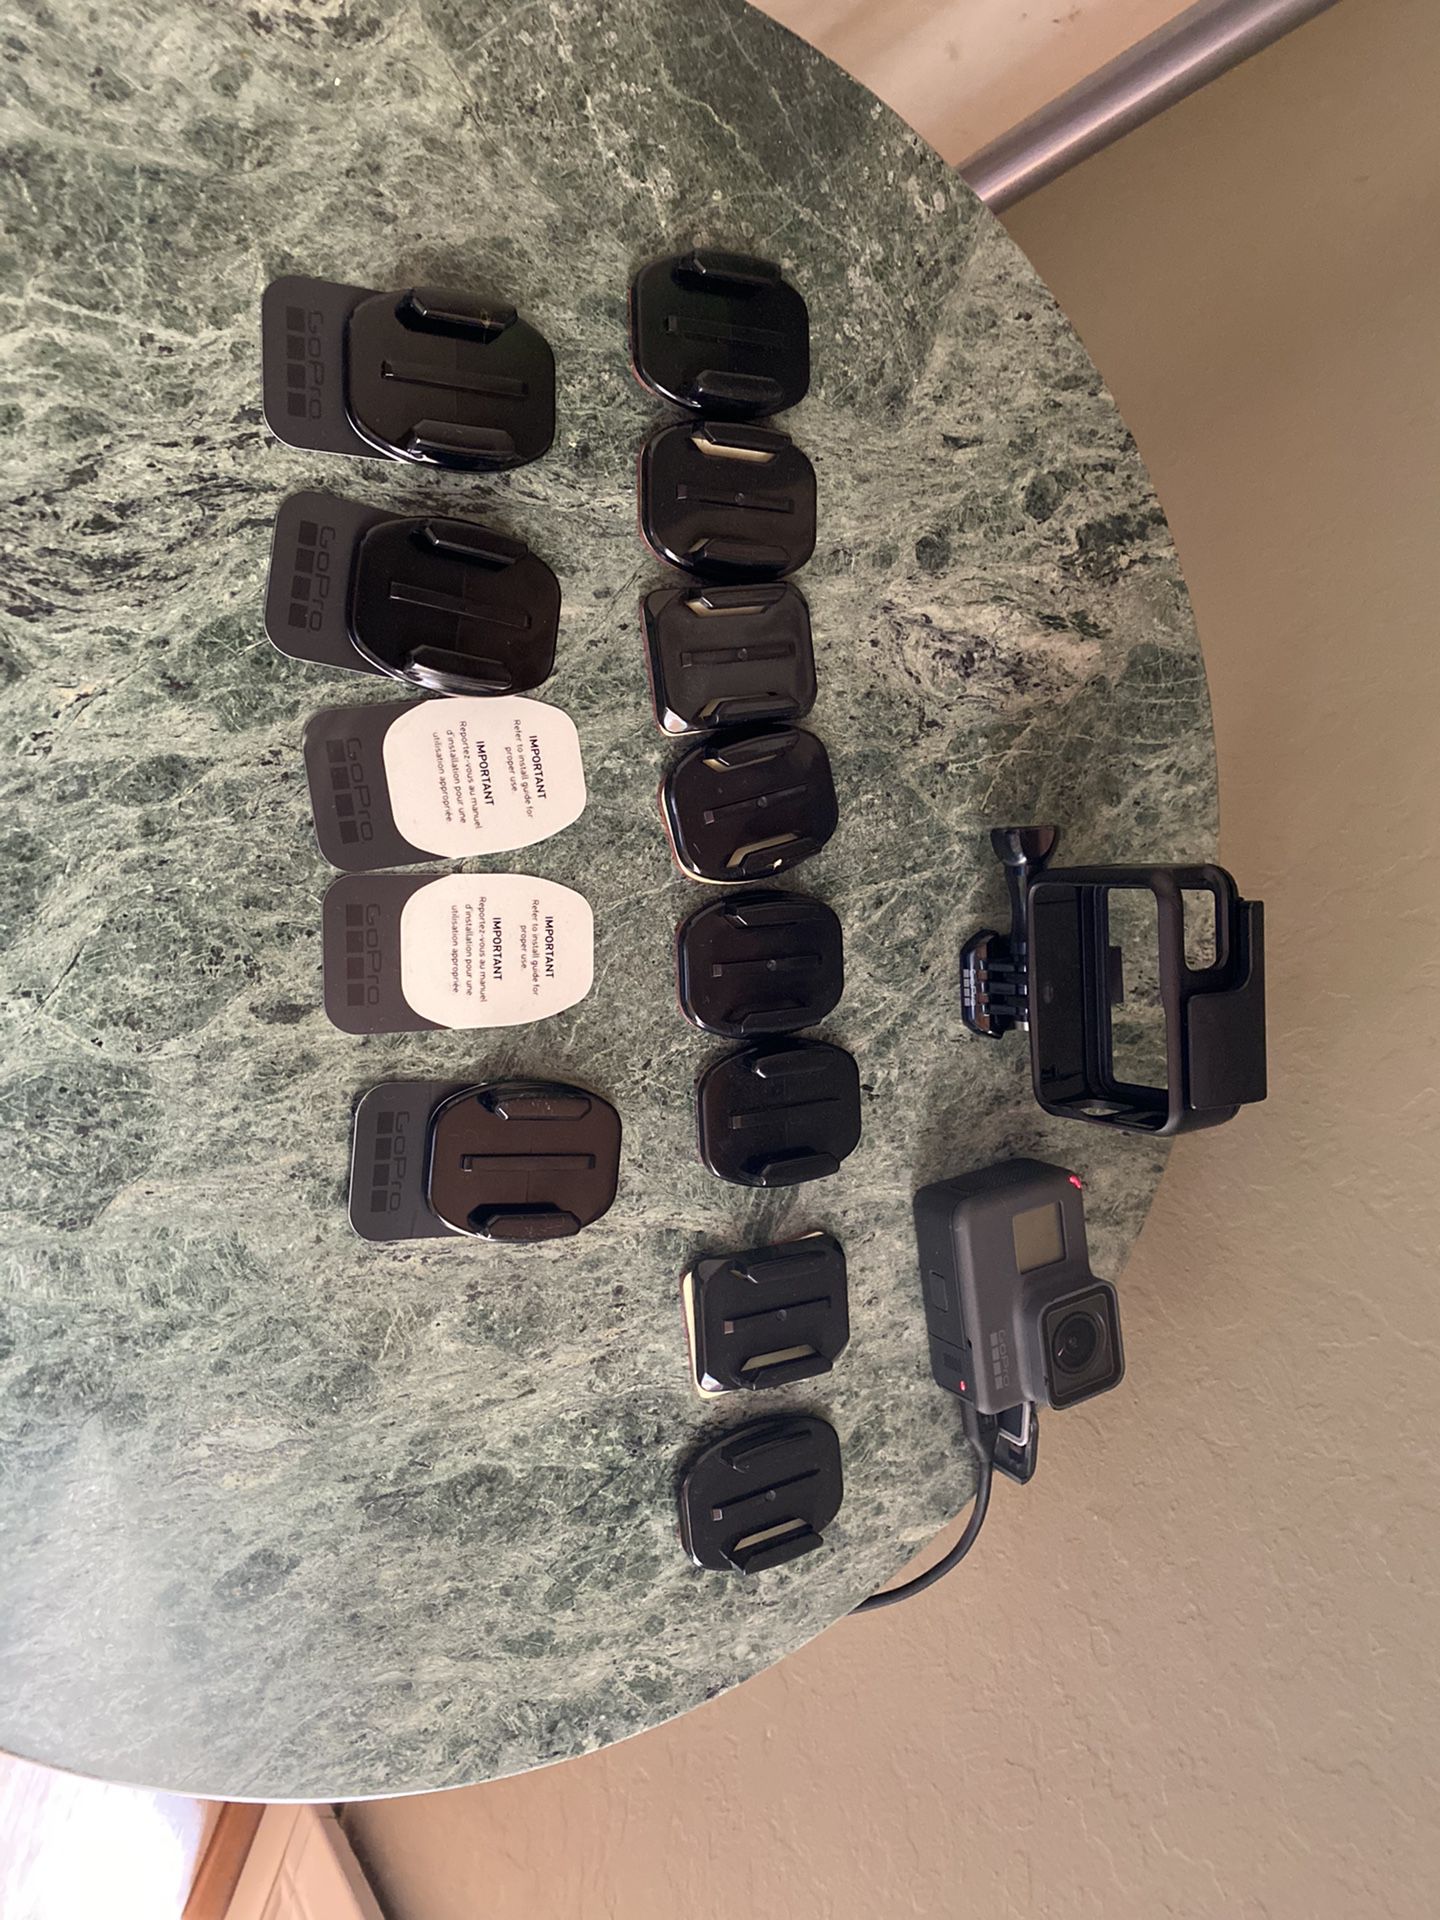 GoPro hero 5 black with tons of mounts and original box